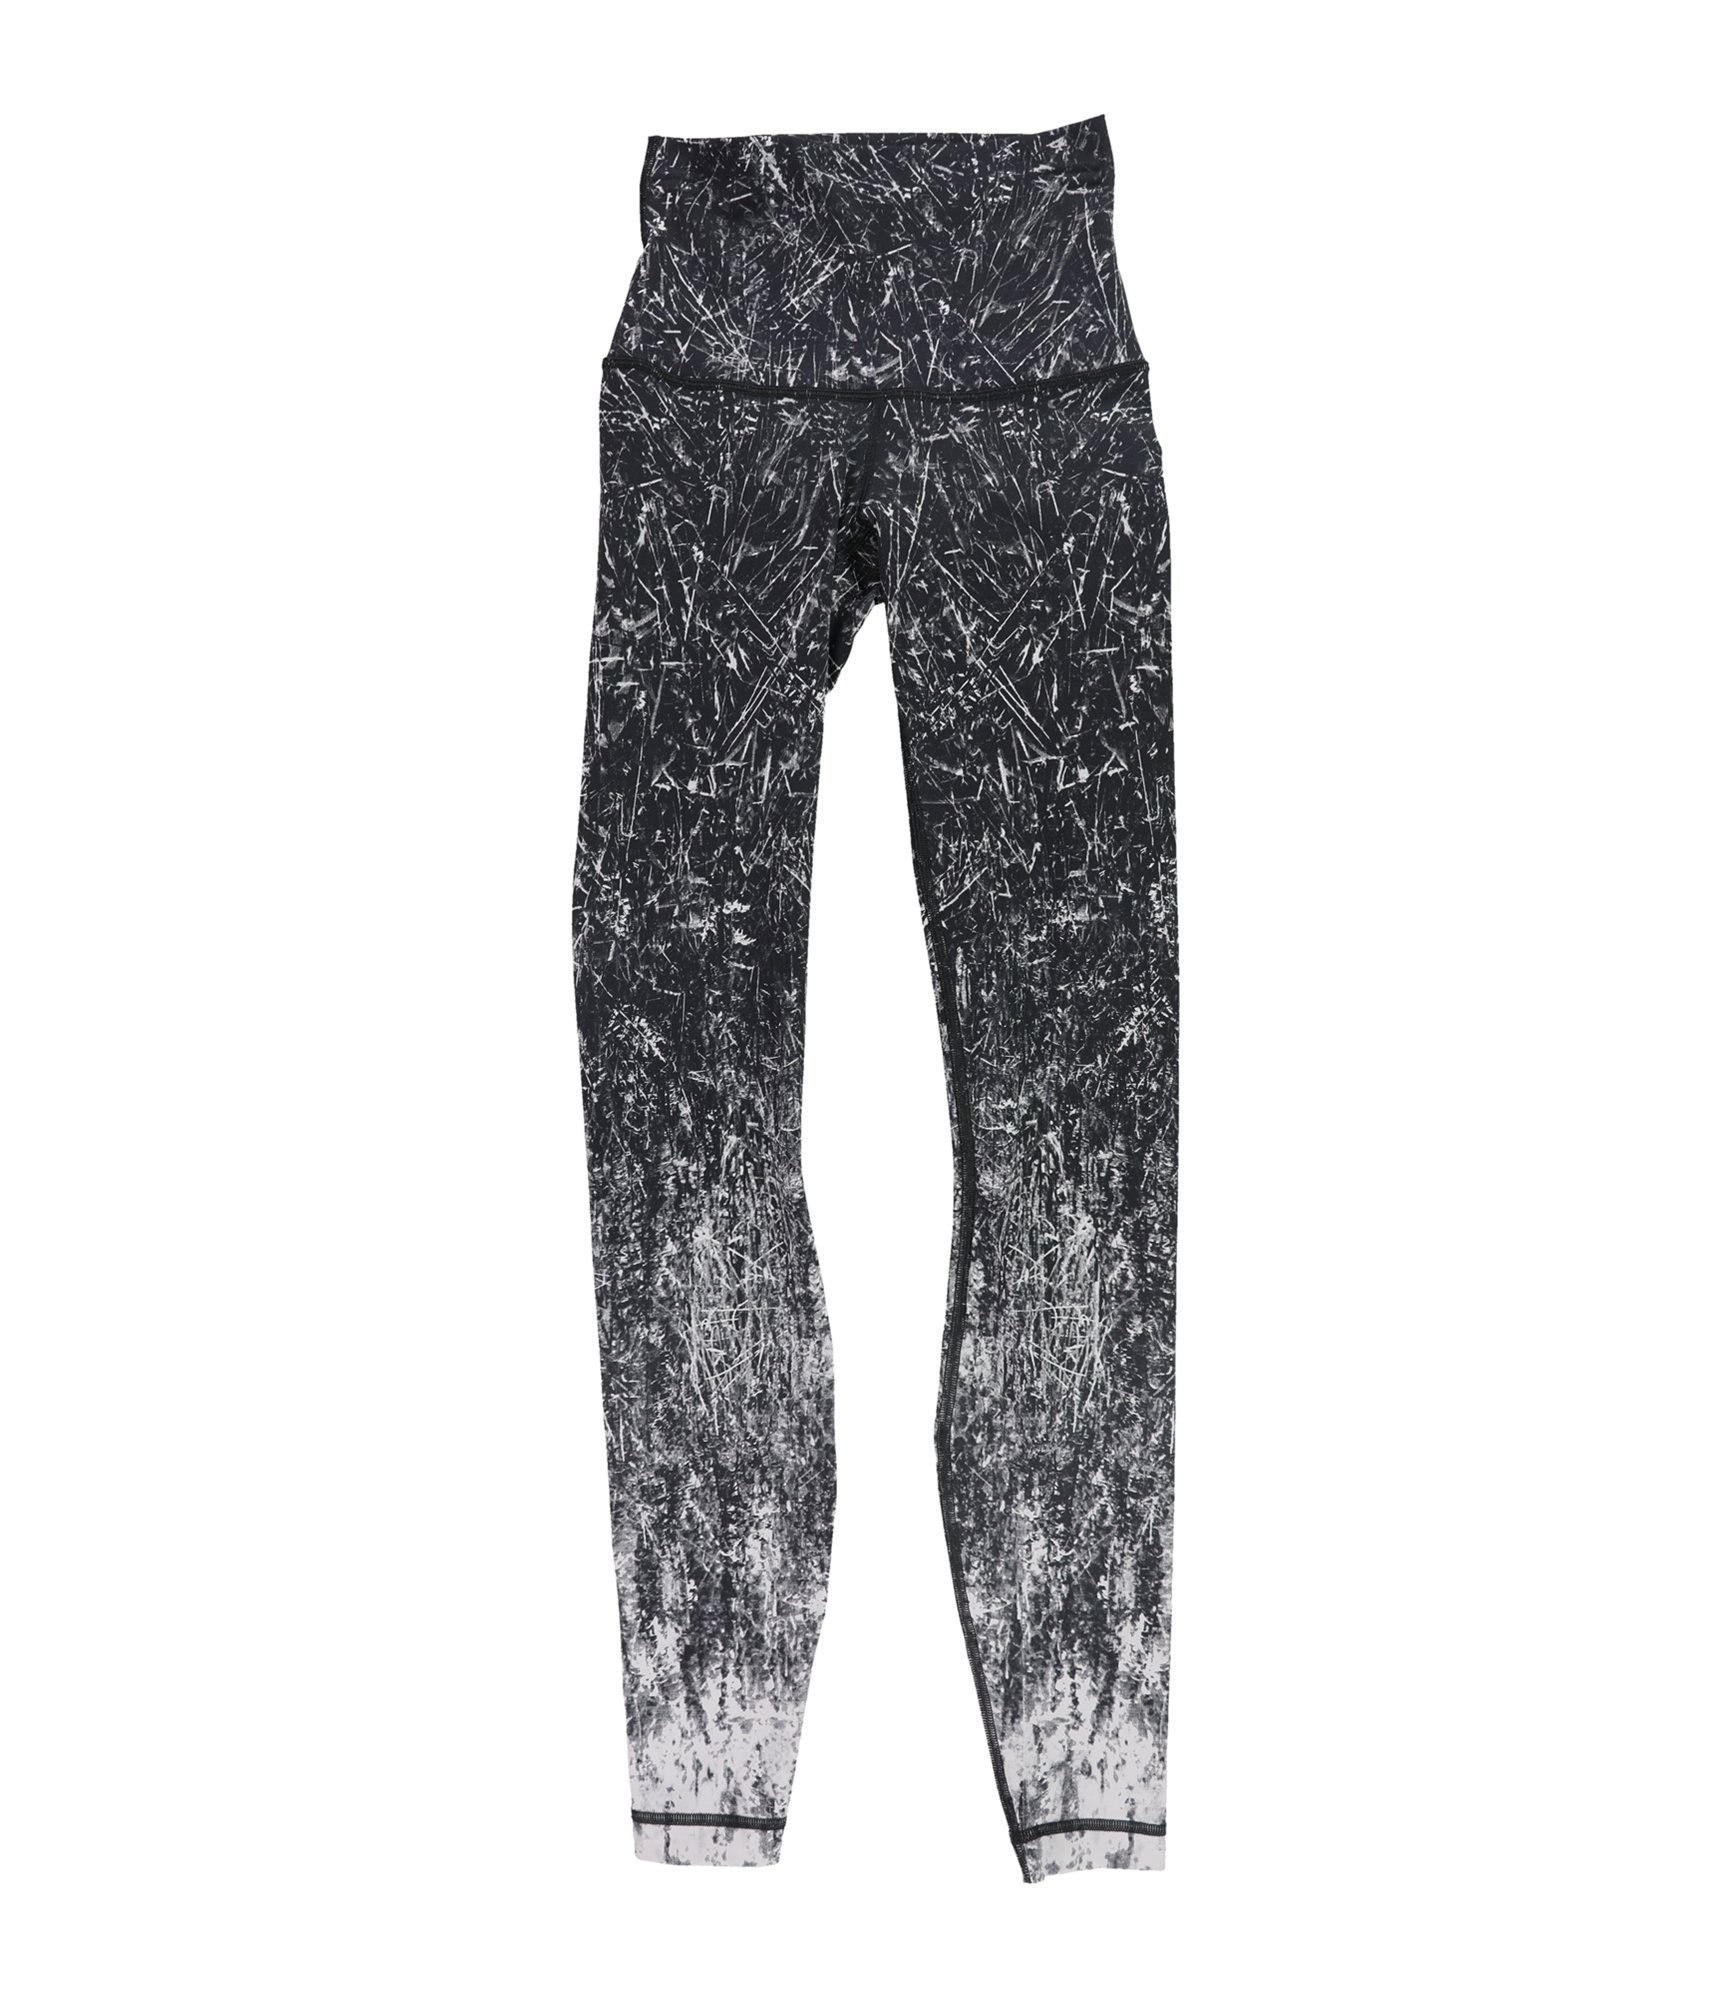 Buy a Lululemon Womens Shatter Compression Athletic Pants